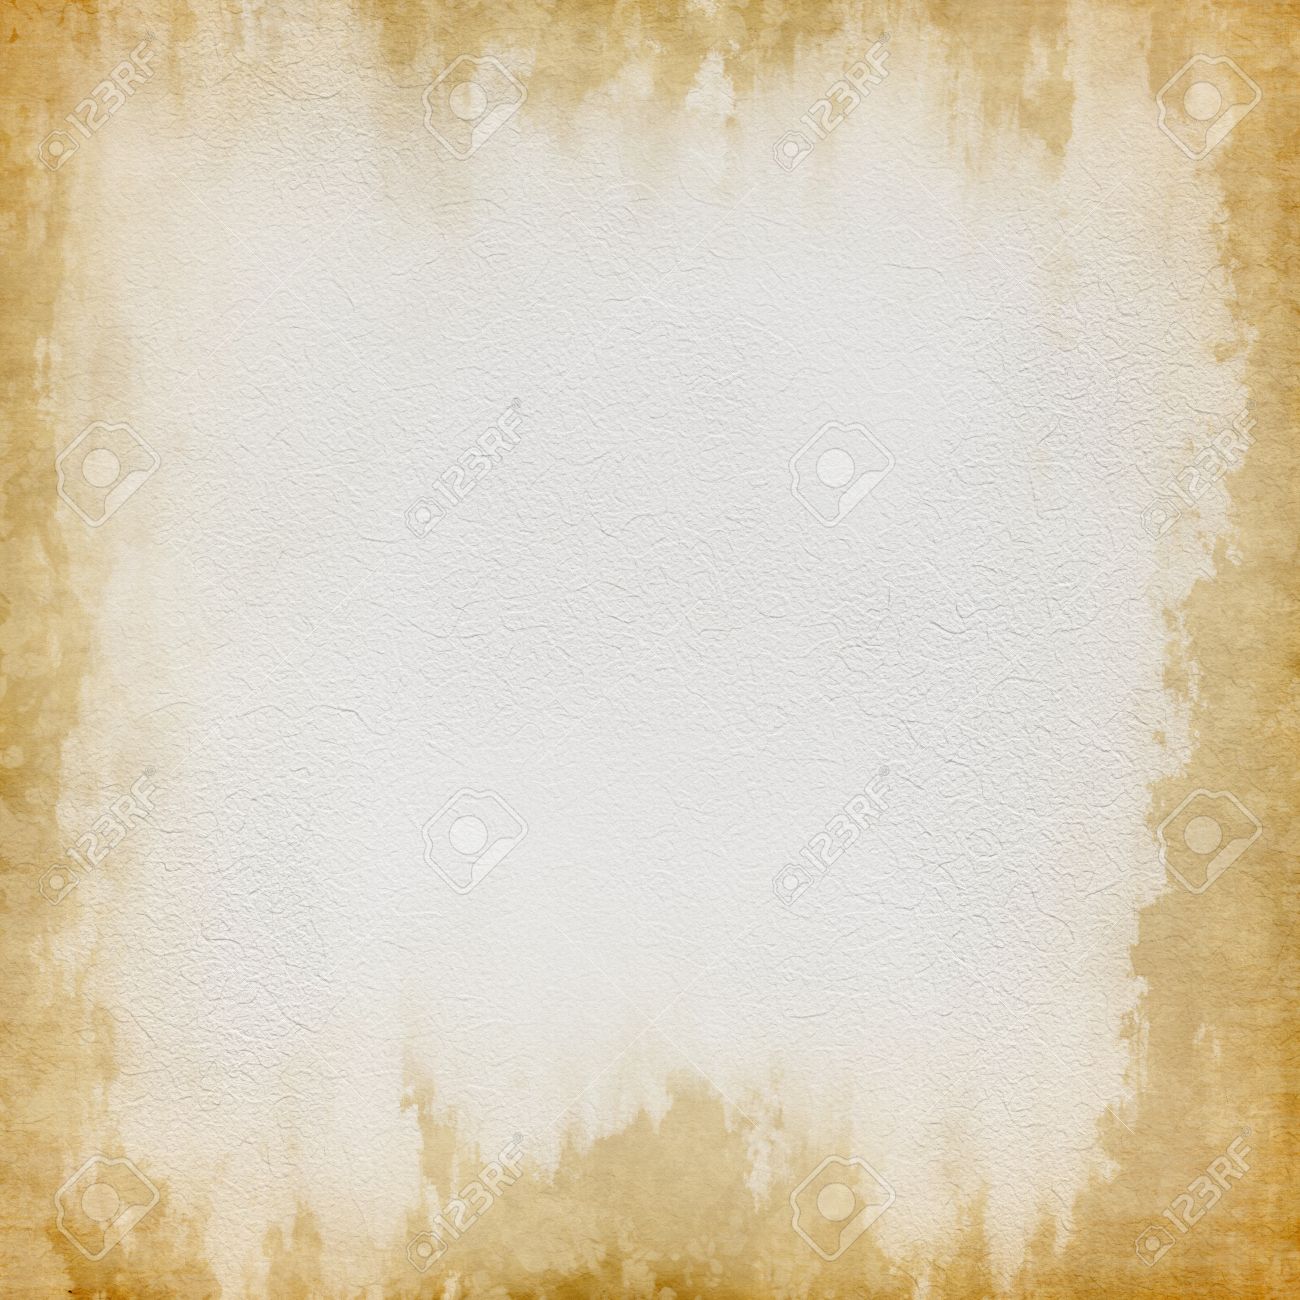 Grunge Old Wet Paper Sheet Background Stock Photo Picture And